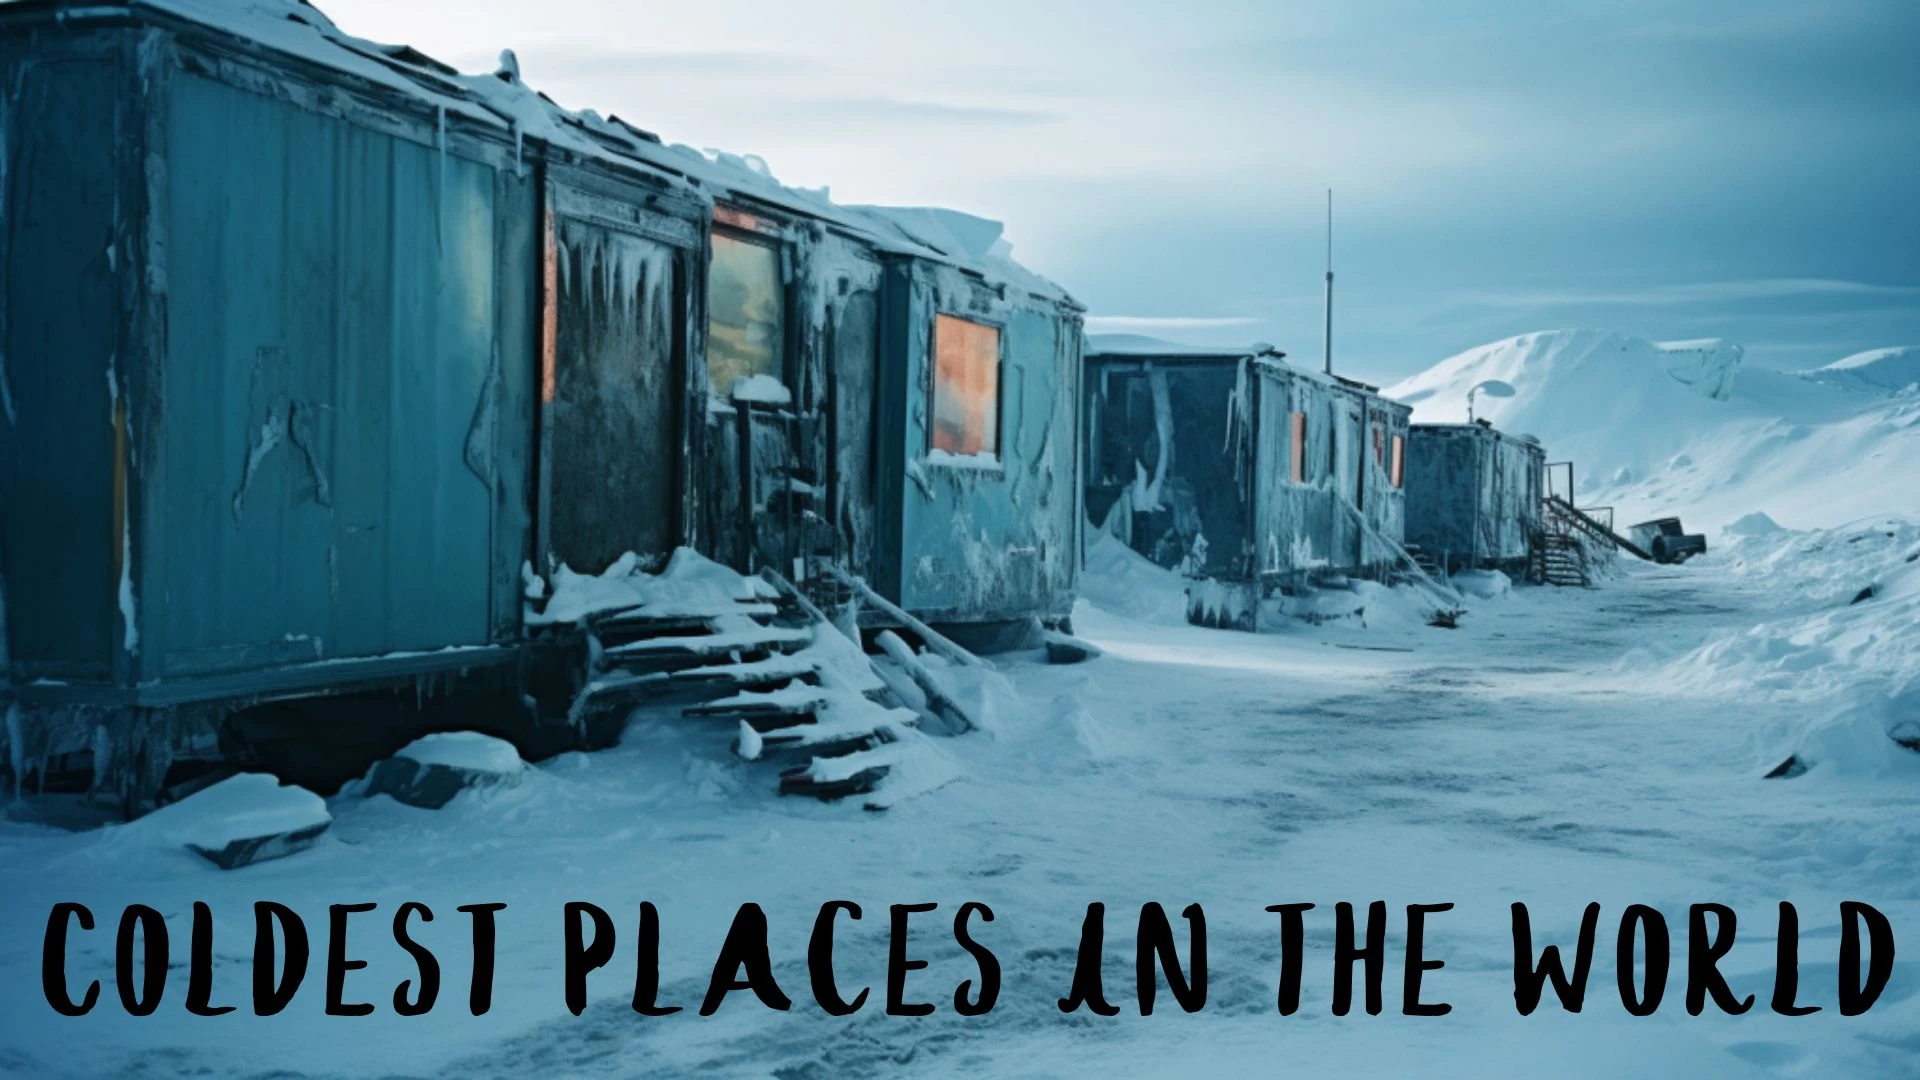 Coldest Places in the World - Top 10 Frozen Extremes